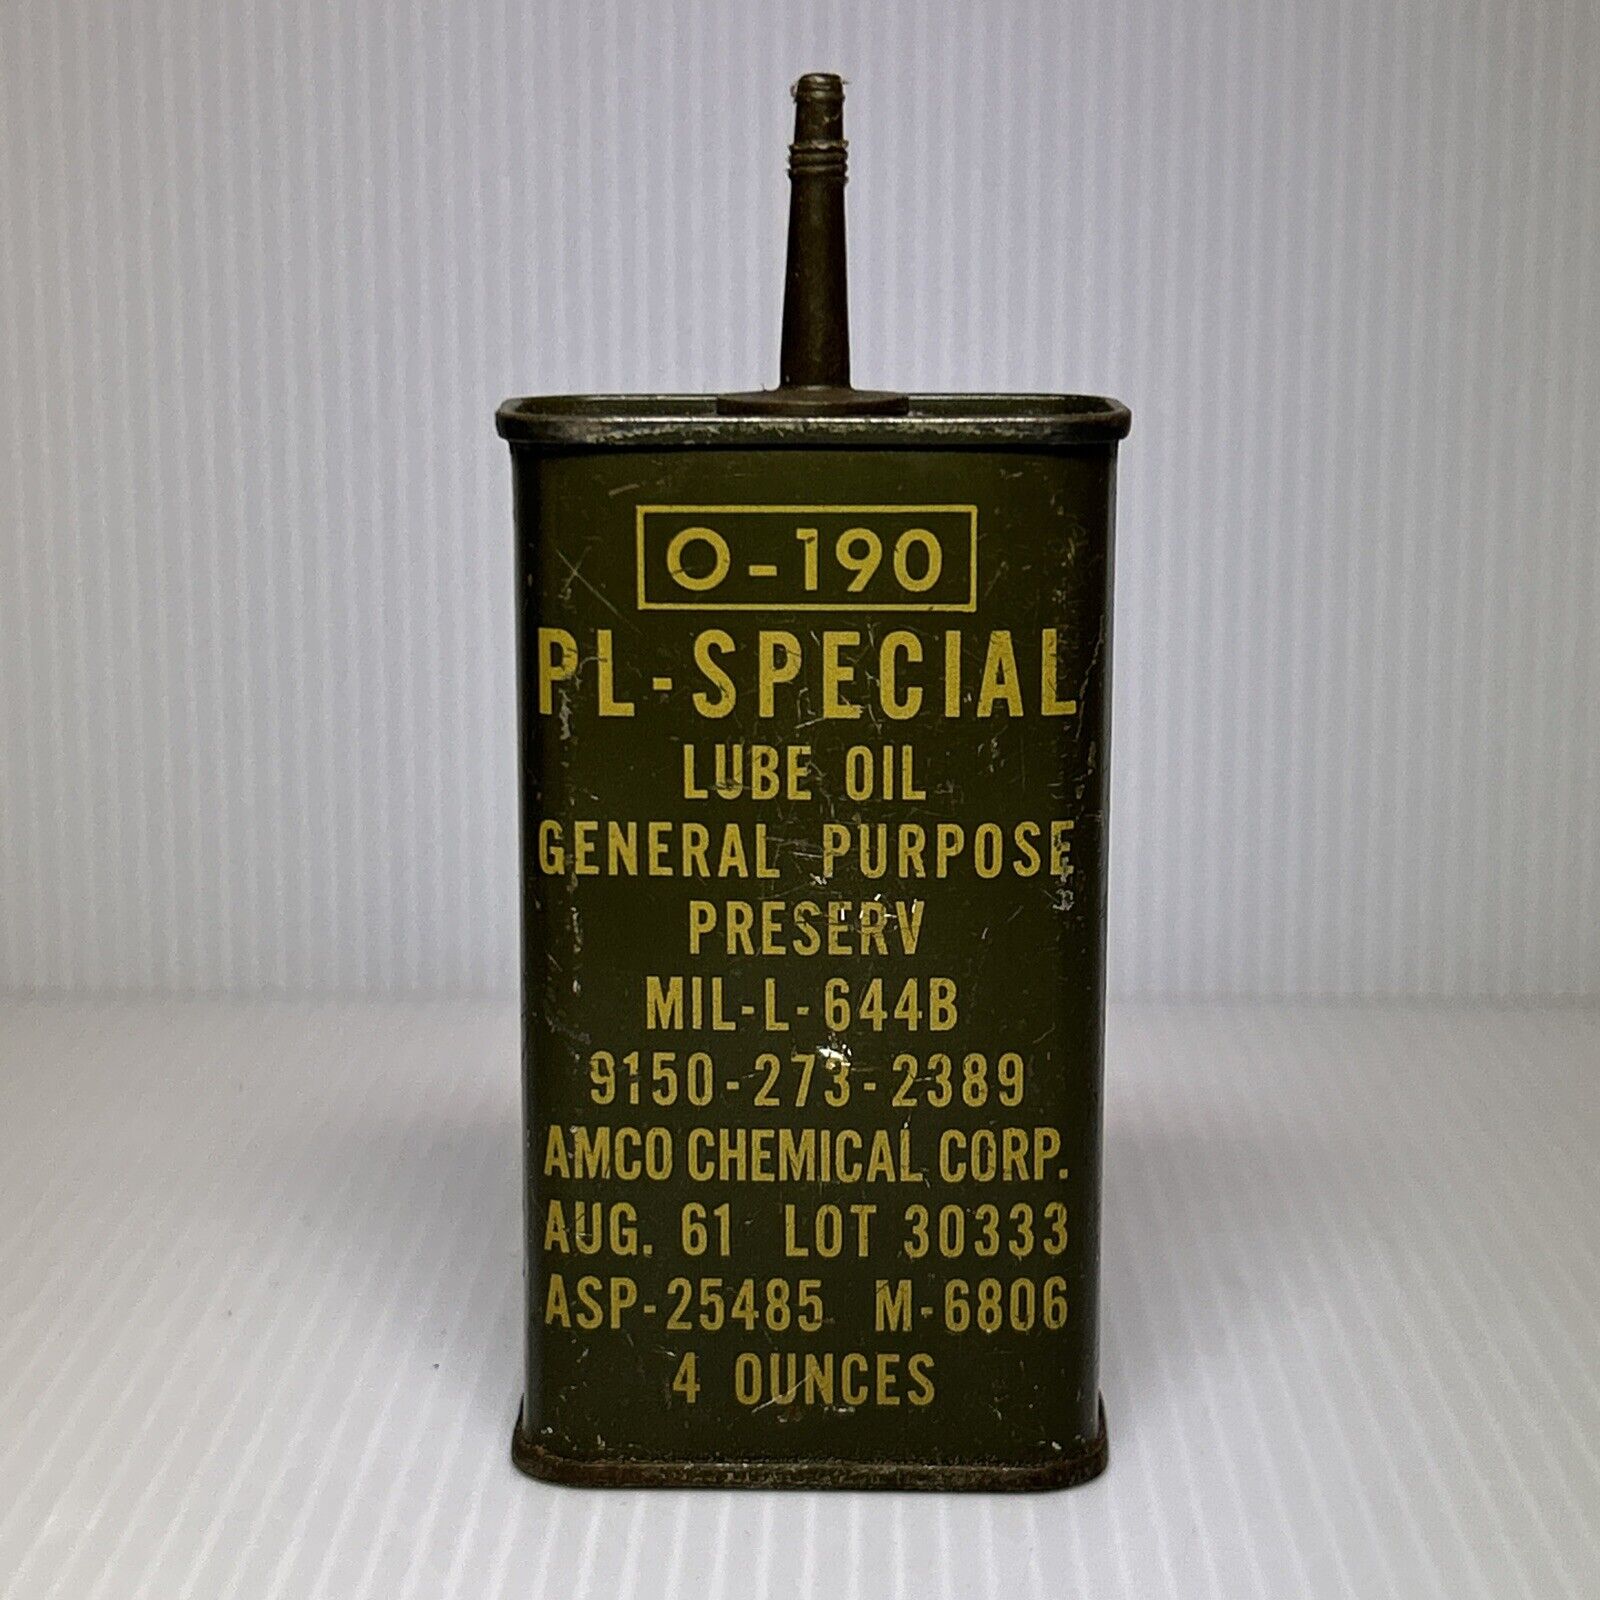 VTG 1961 Military Oil Tin Can, O-190 PL-SPECIAL Lube Oil 4oz. ~ Old Advertising